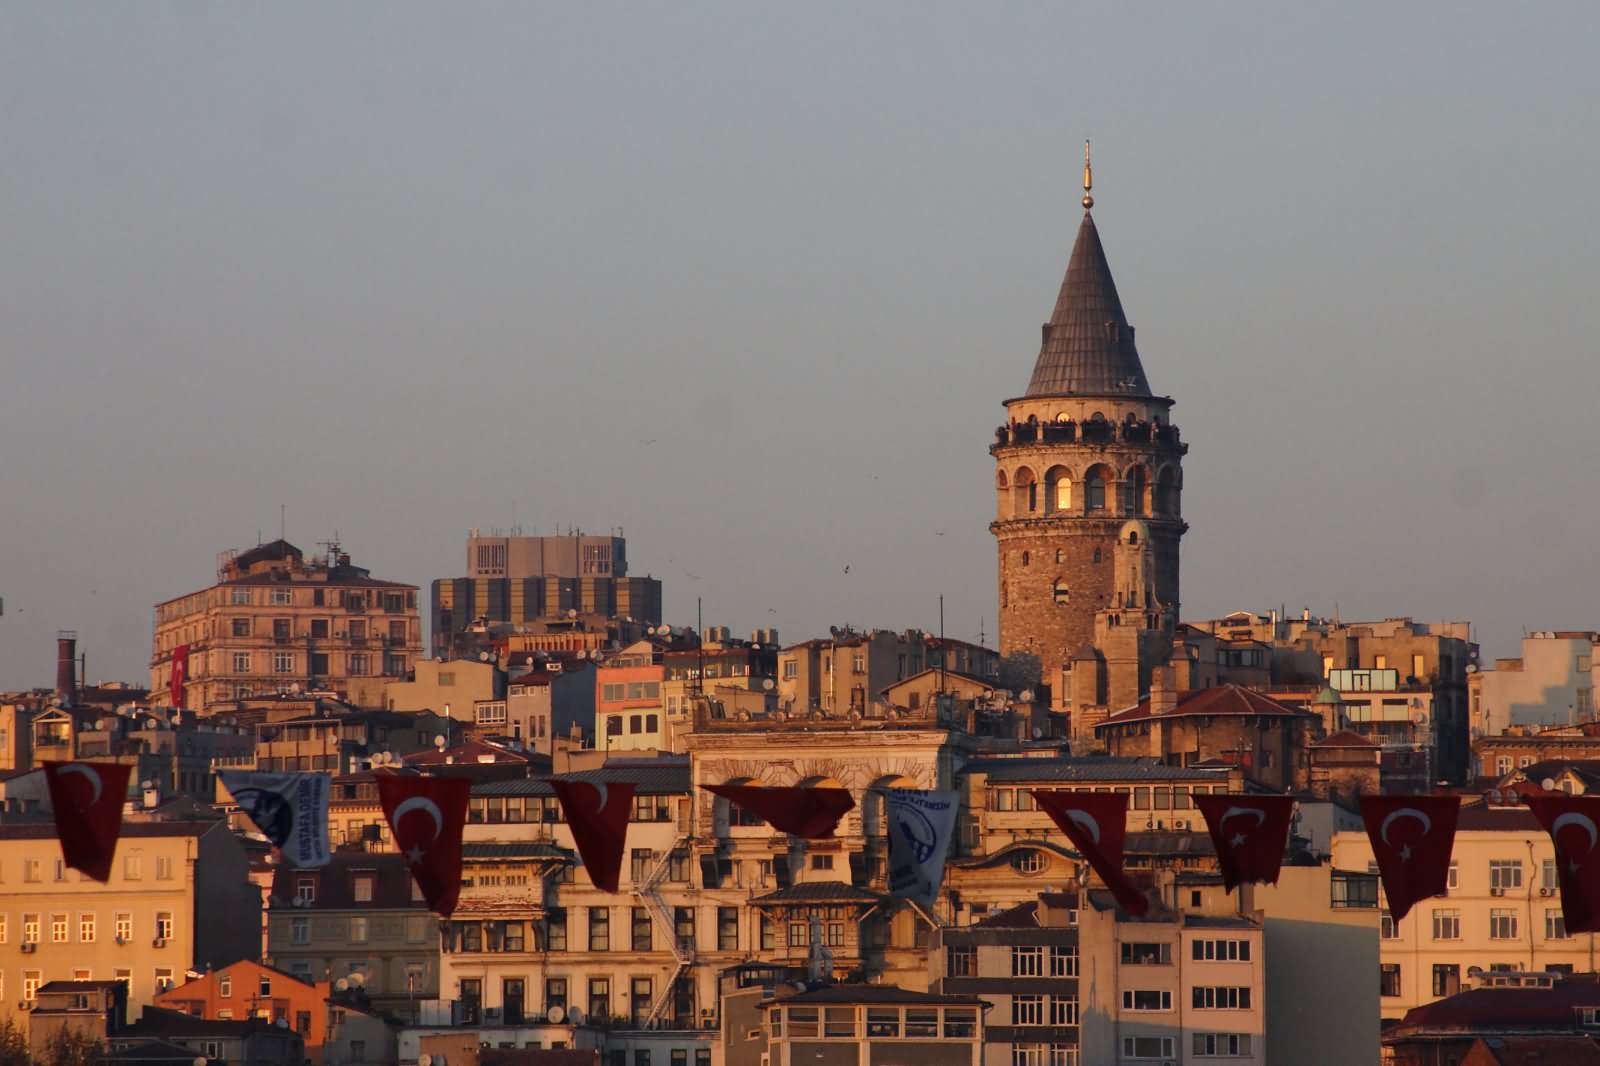 The Galata Tower At Dusk In Istanbul